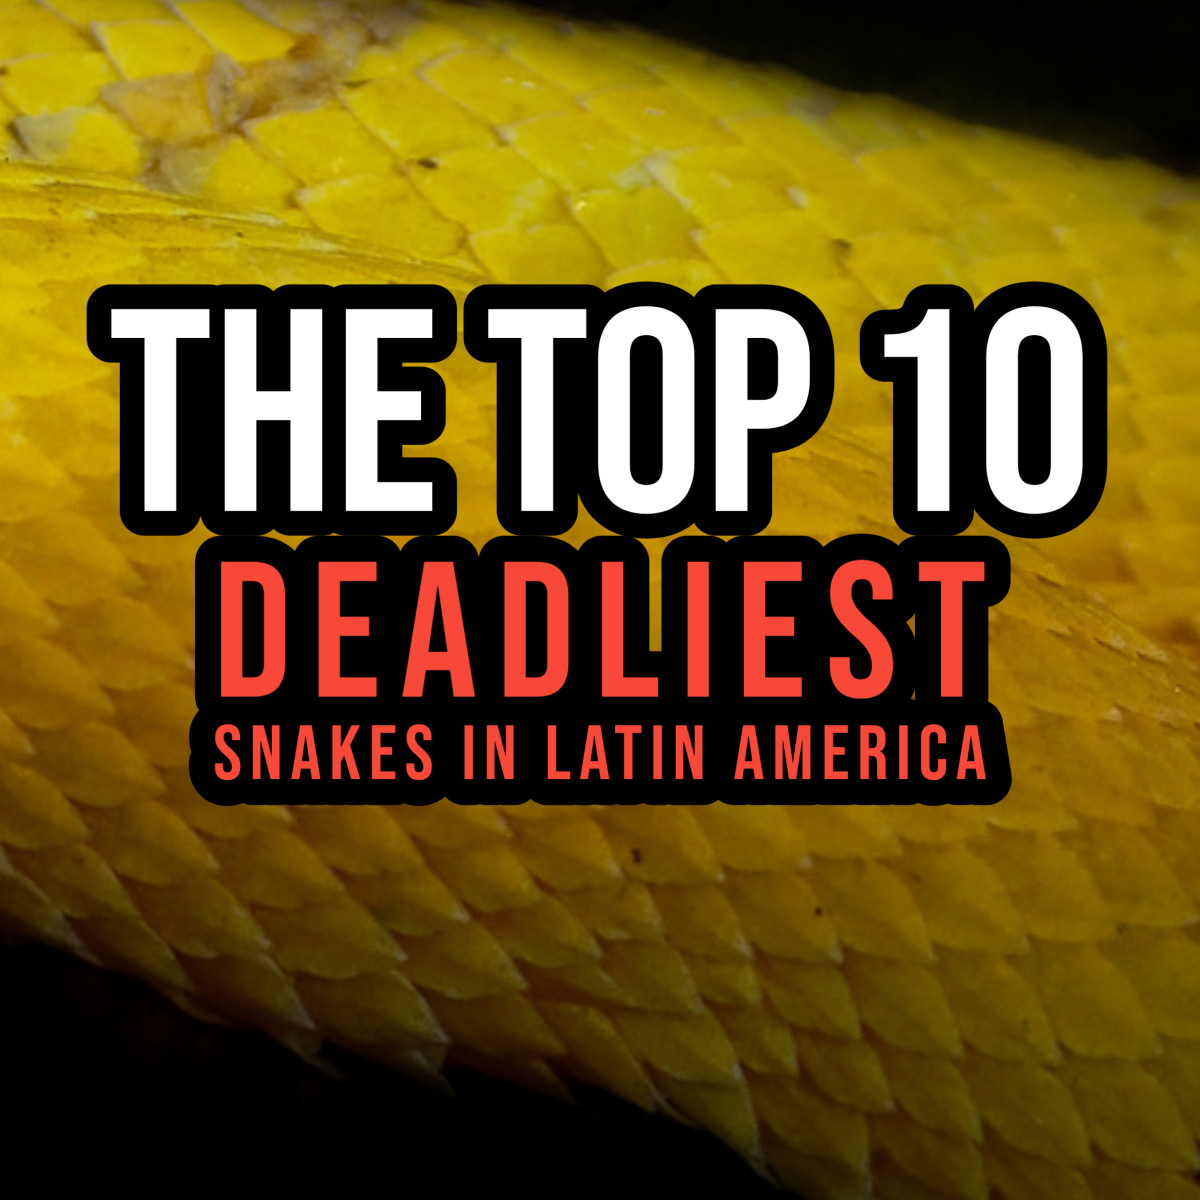 The Top 10 Deadliest Snakes in Latin America